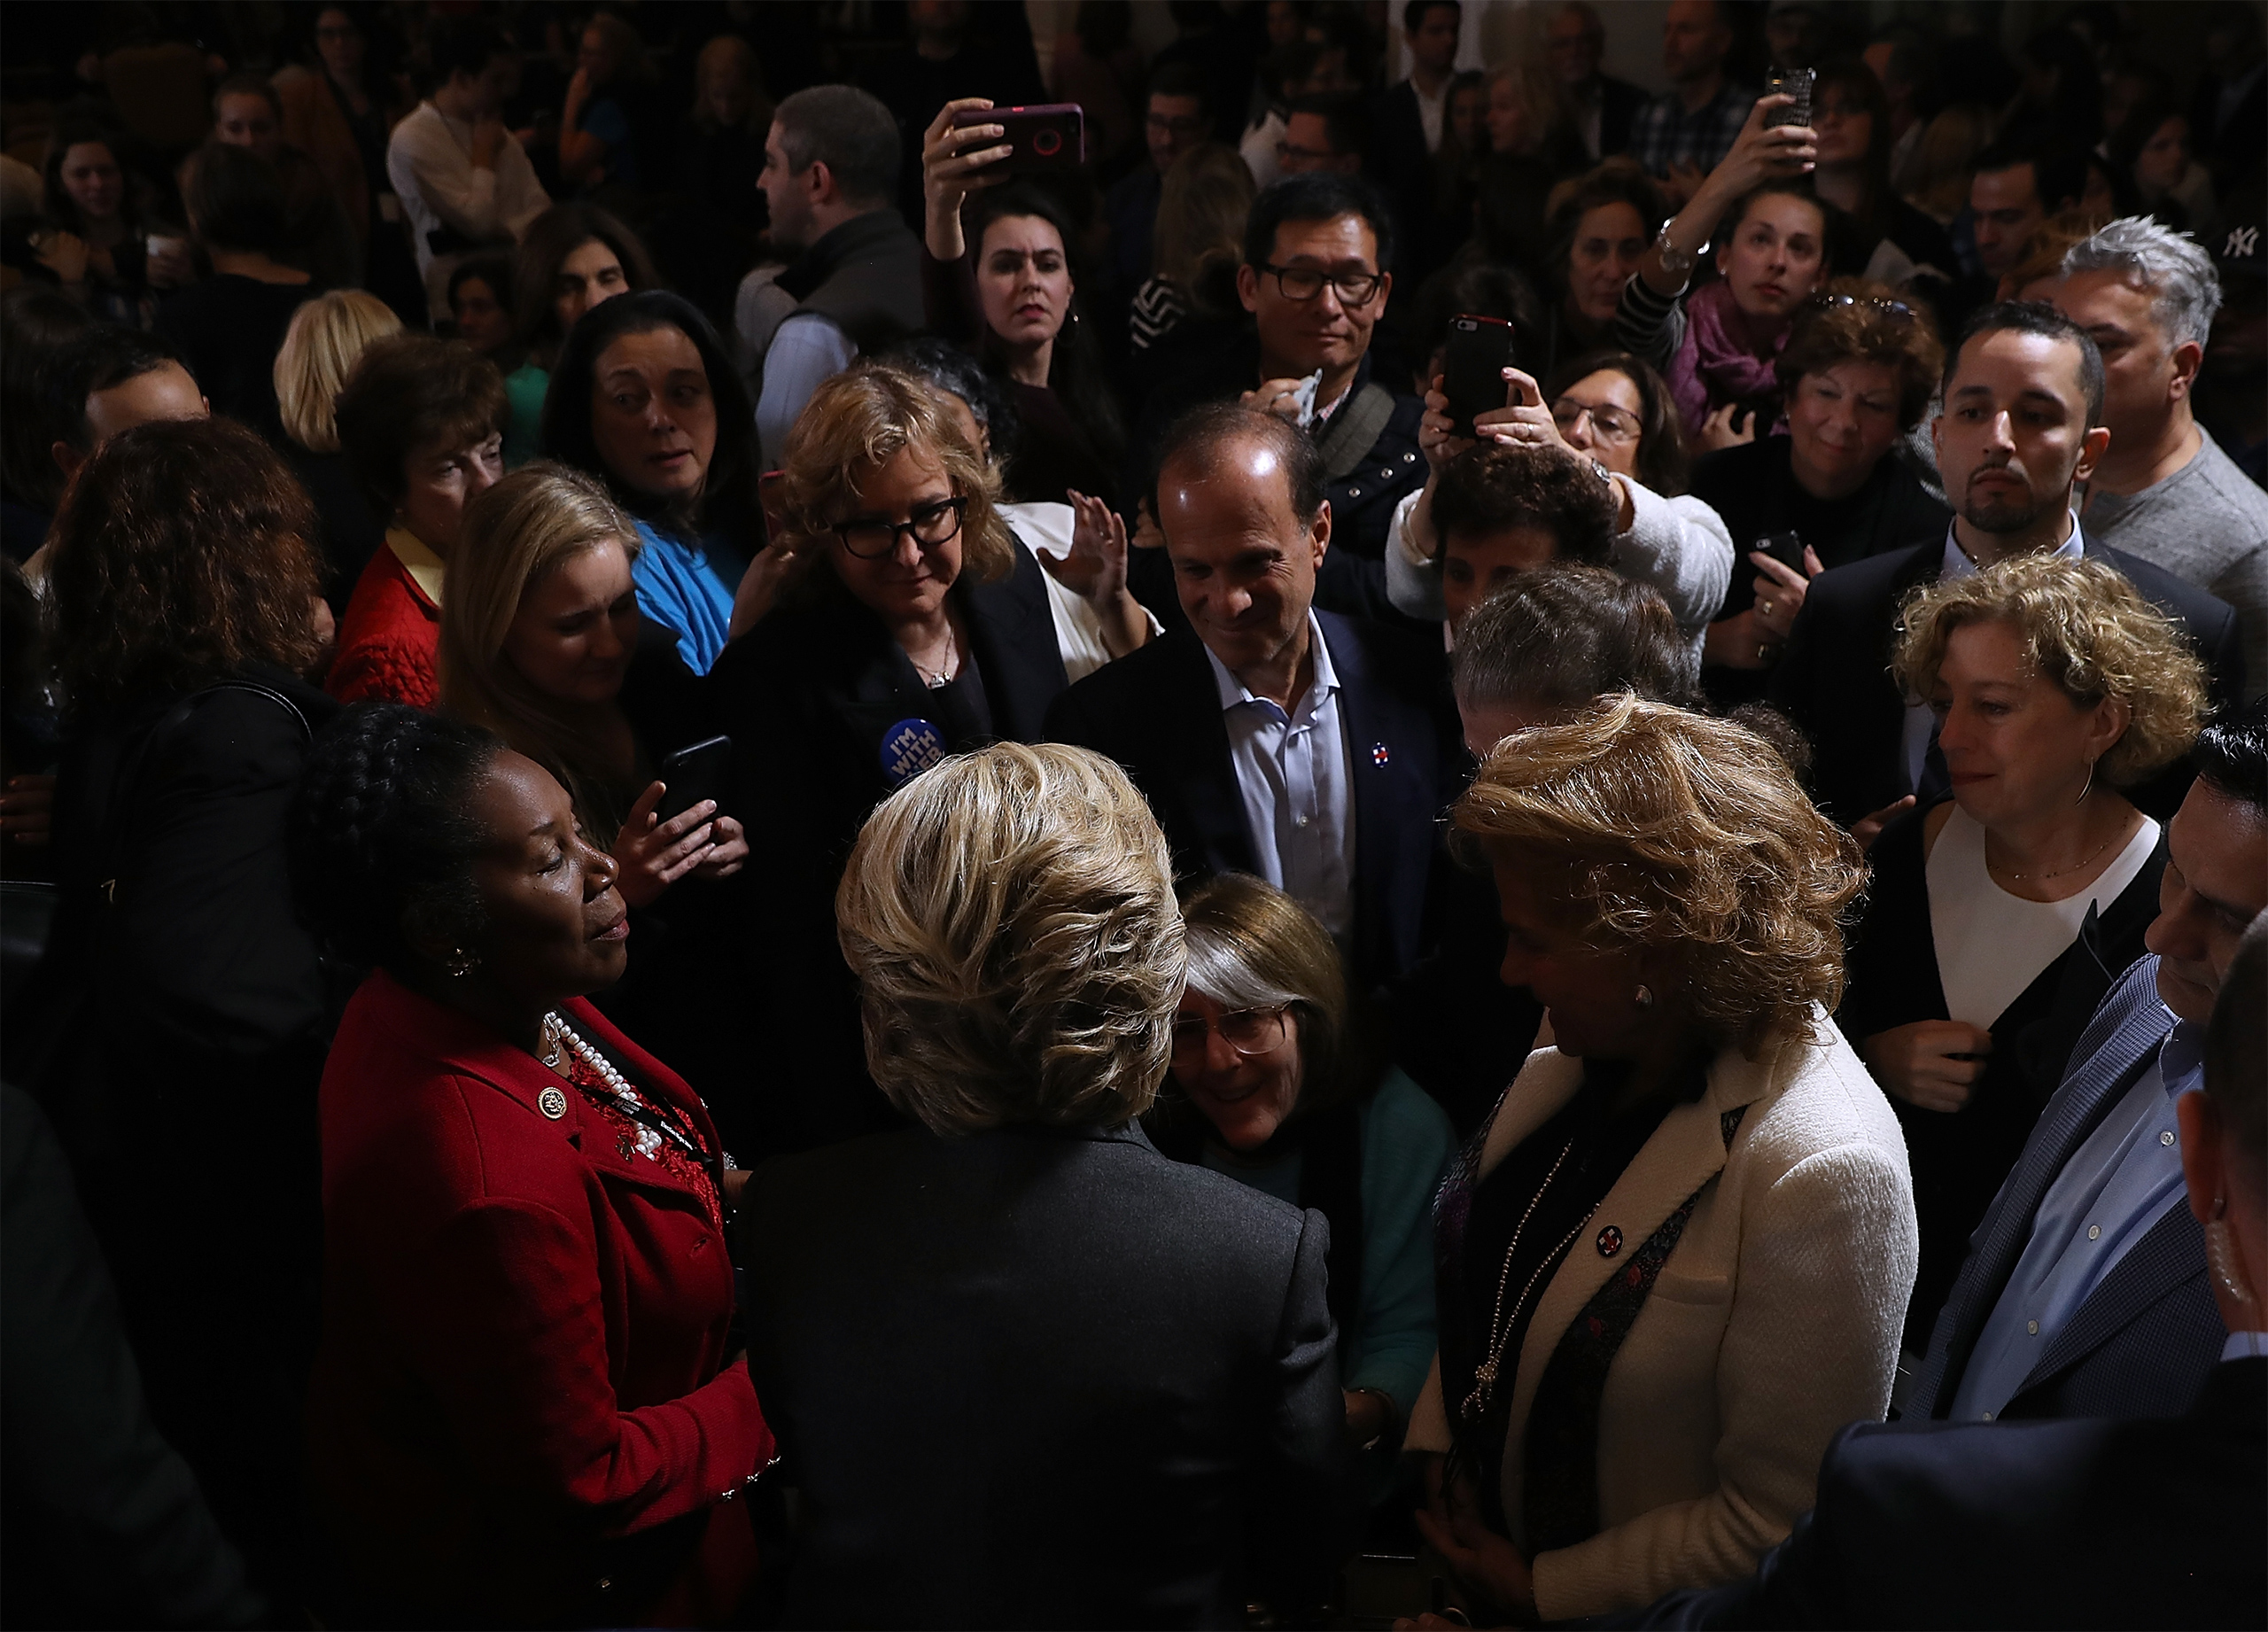 Former Secretary of State Hillary Clinton greets supporters and members of her staff during a news conference at the New Yorker Hotel on November 9, 2016 in New York City. Hillary Clinton conceded the U.S. Presidency to Republican challenger Donald Trump. (Justin Sullivan—Getty Images)